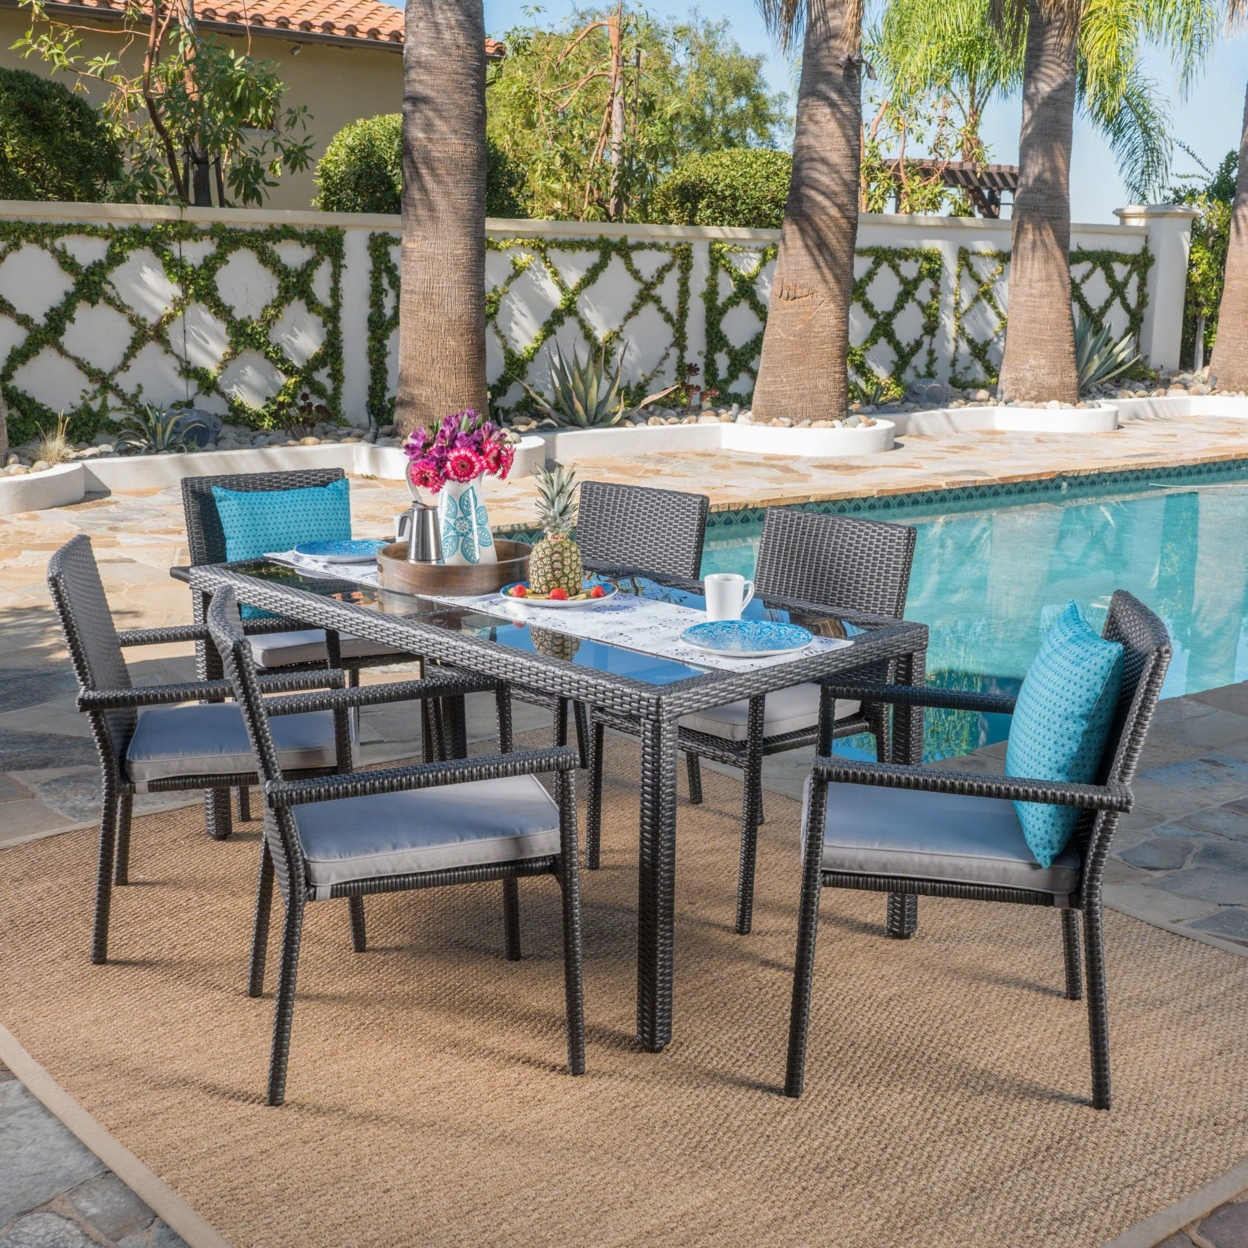 San Simeon Outdoor 7 Piece Wicker Dining Set With Water Resistant Cushions - Gray/Silver